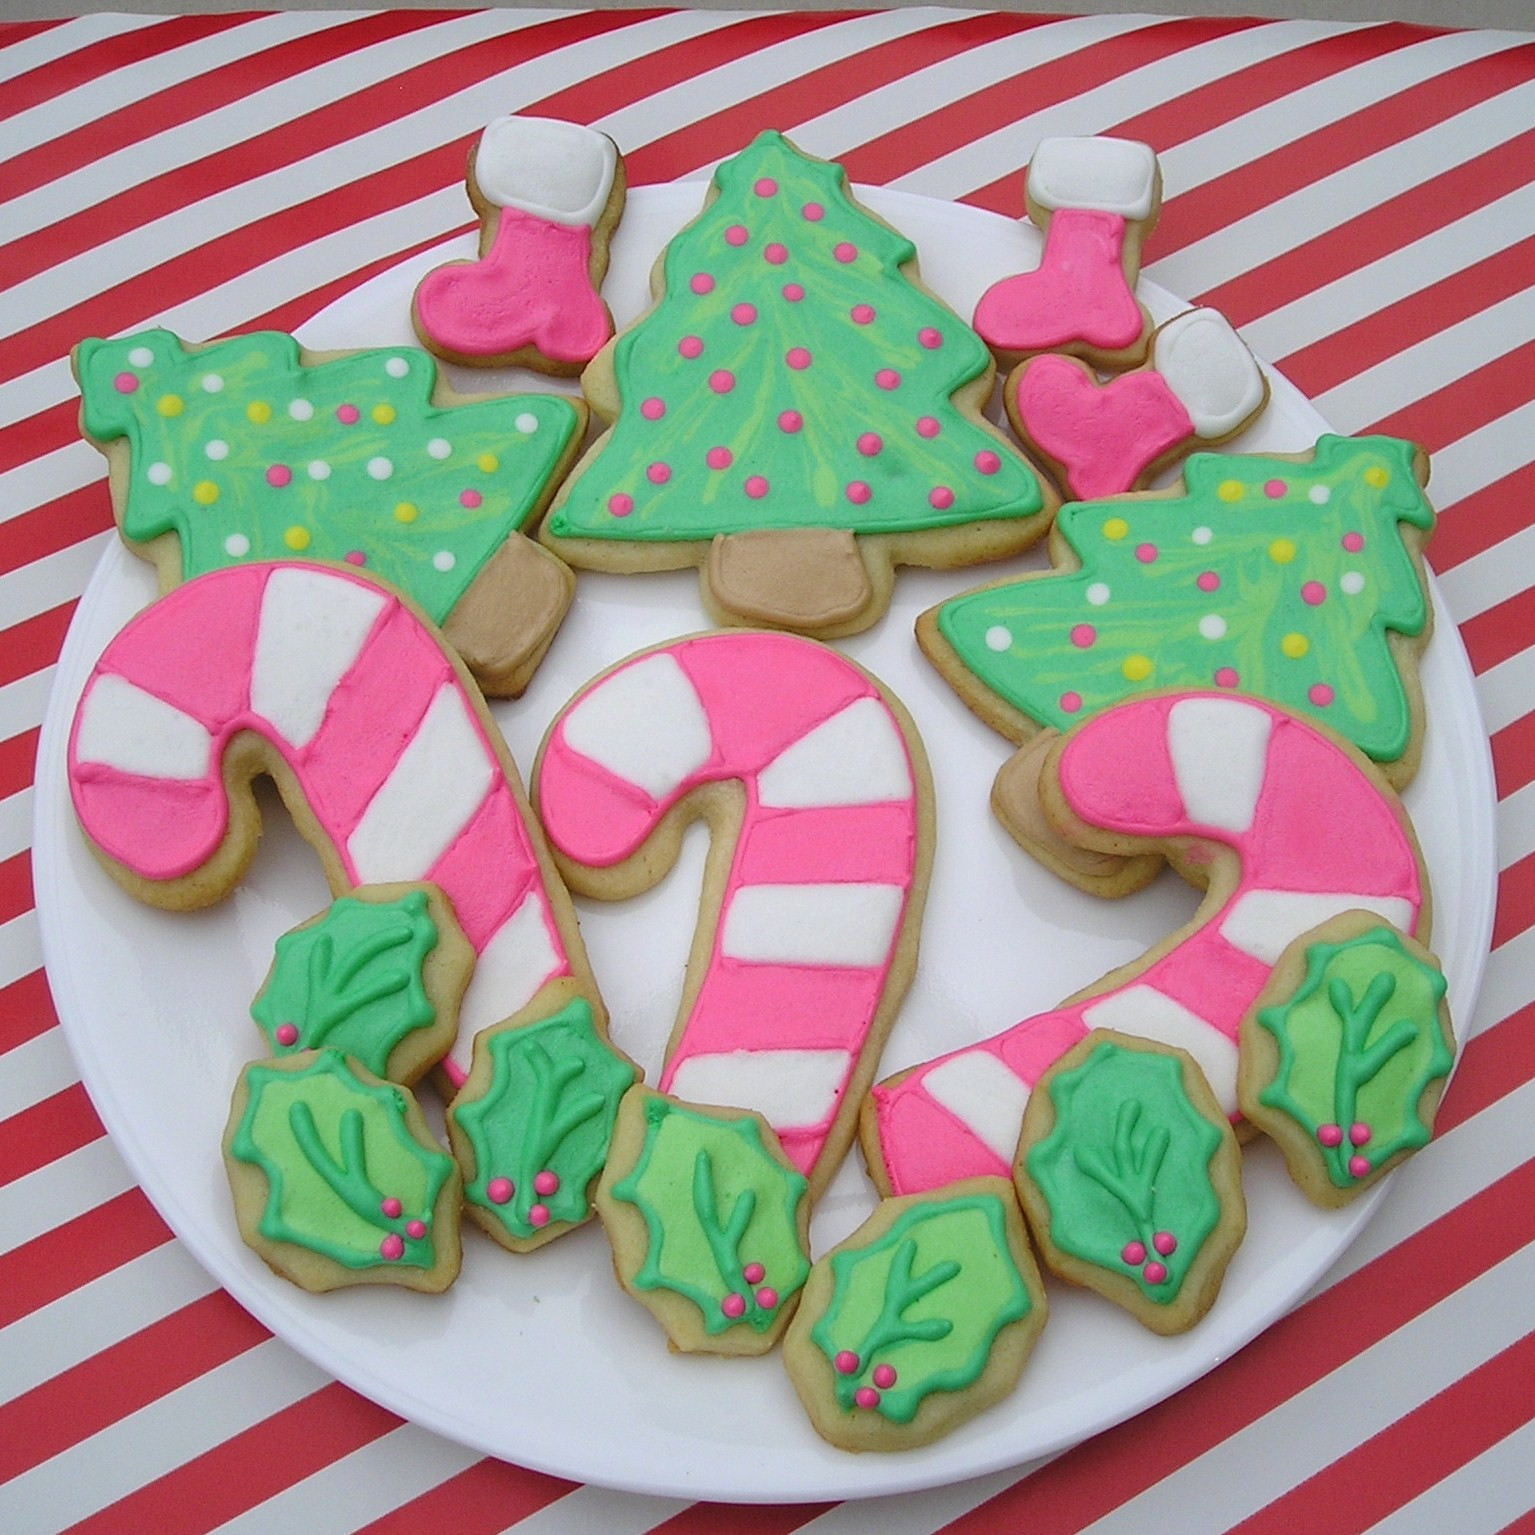 Decorated Christmas Sugar Cookies
 I had so much fun decorating them I was hooked The icing